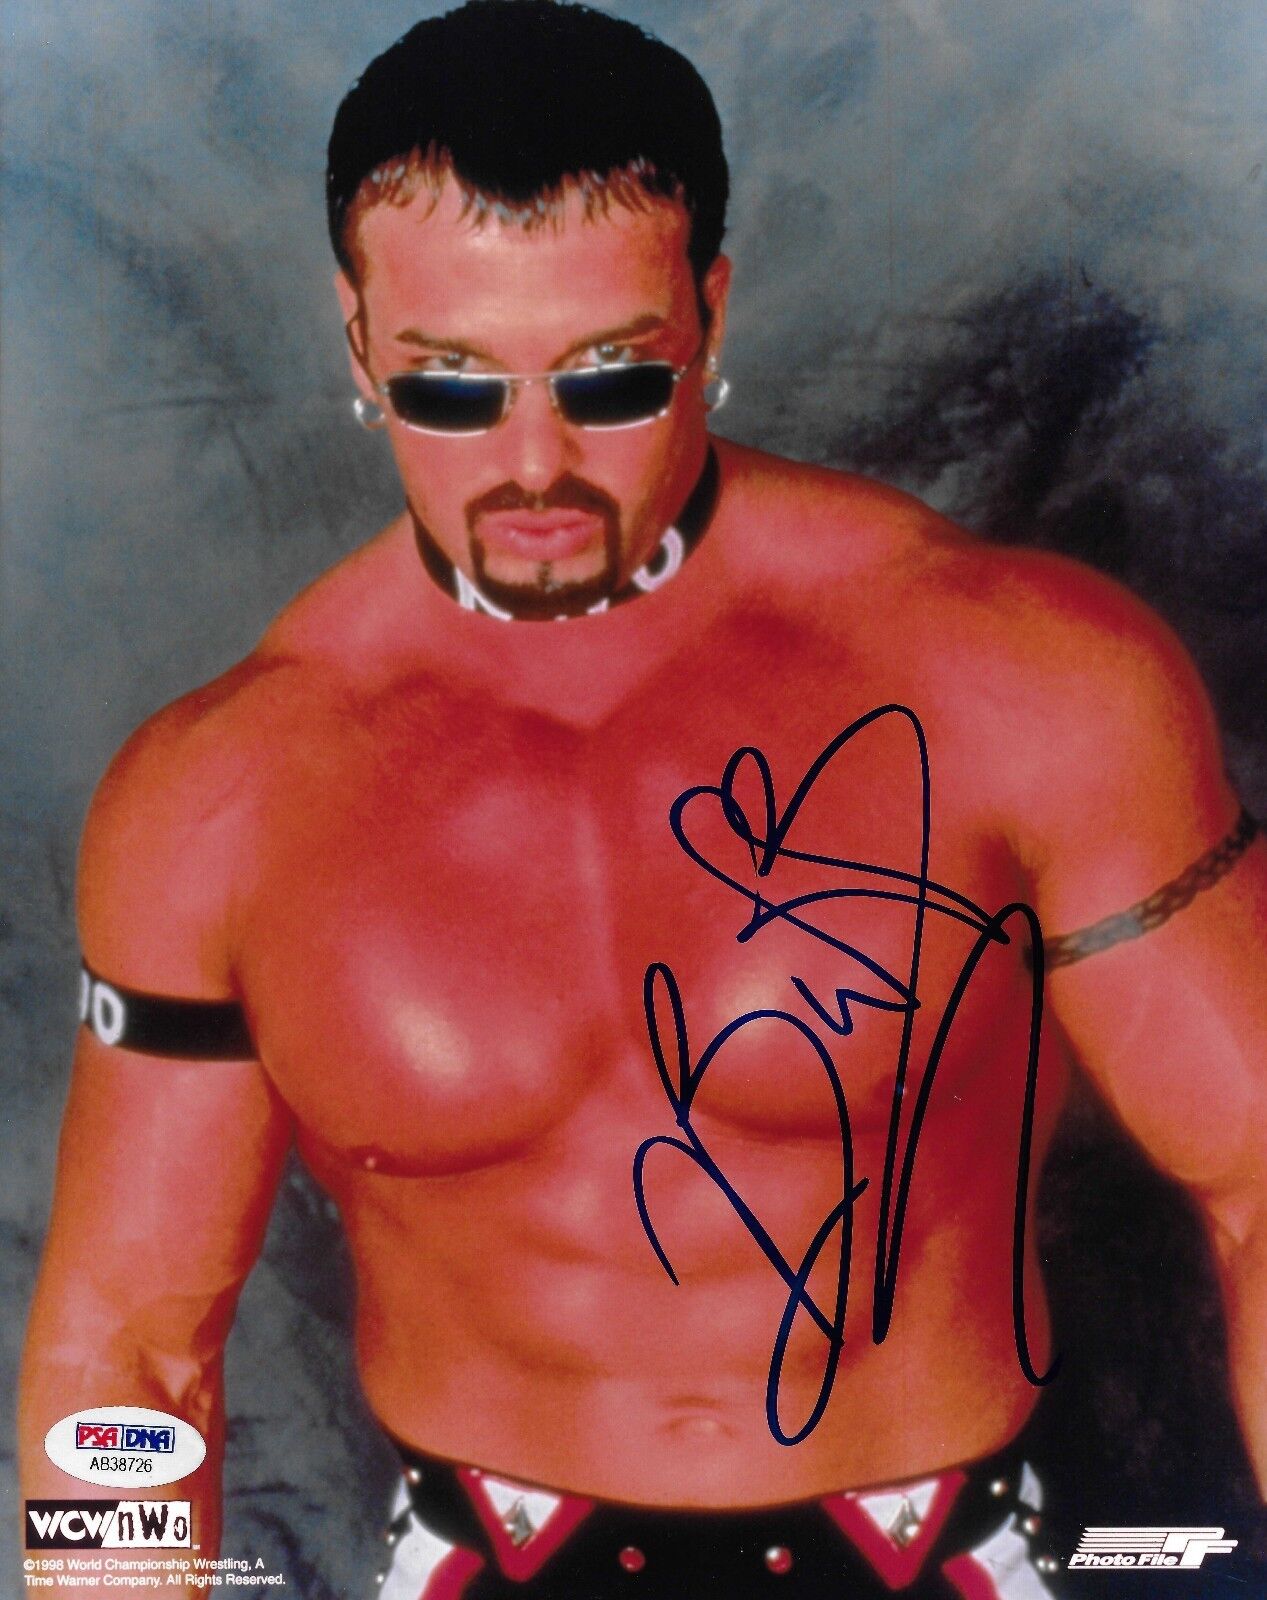 Buff Bagwell Signed WWE 8x10 Photo Poster painting PSA/DNA COA WCW NWO Picture Autograph Nitro 6